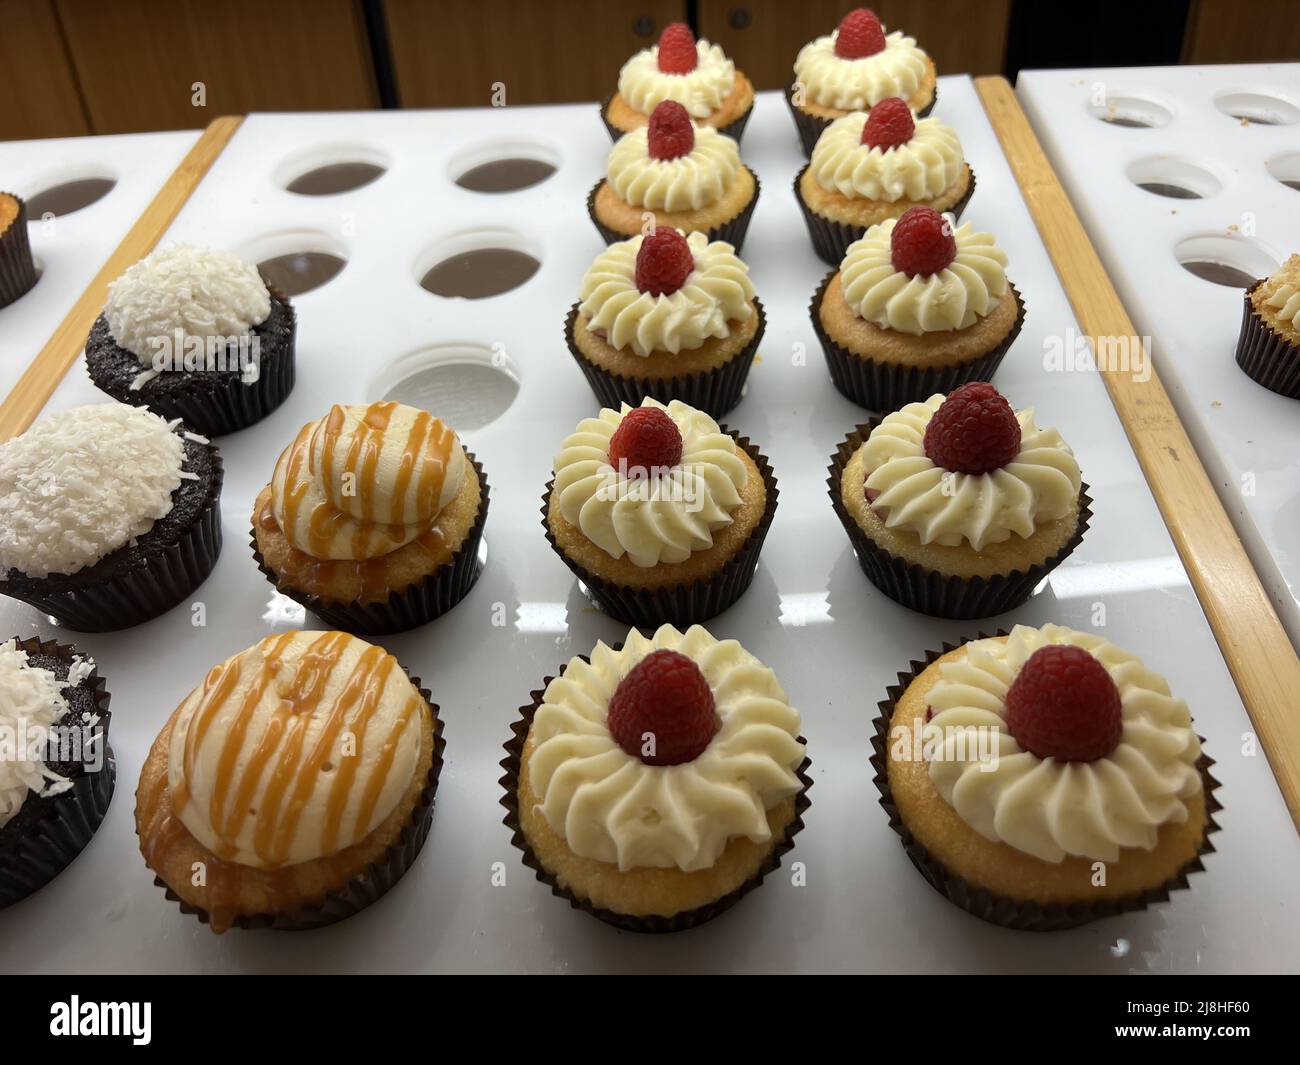 Cupcakes are on display at Cupcakin Bakery in Walnut Creek, California, March 3, 2022. Photo courtesy Sftm. Stock Photo